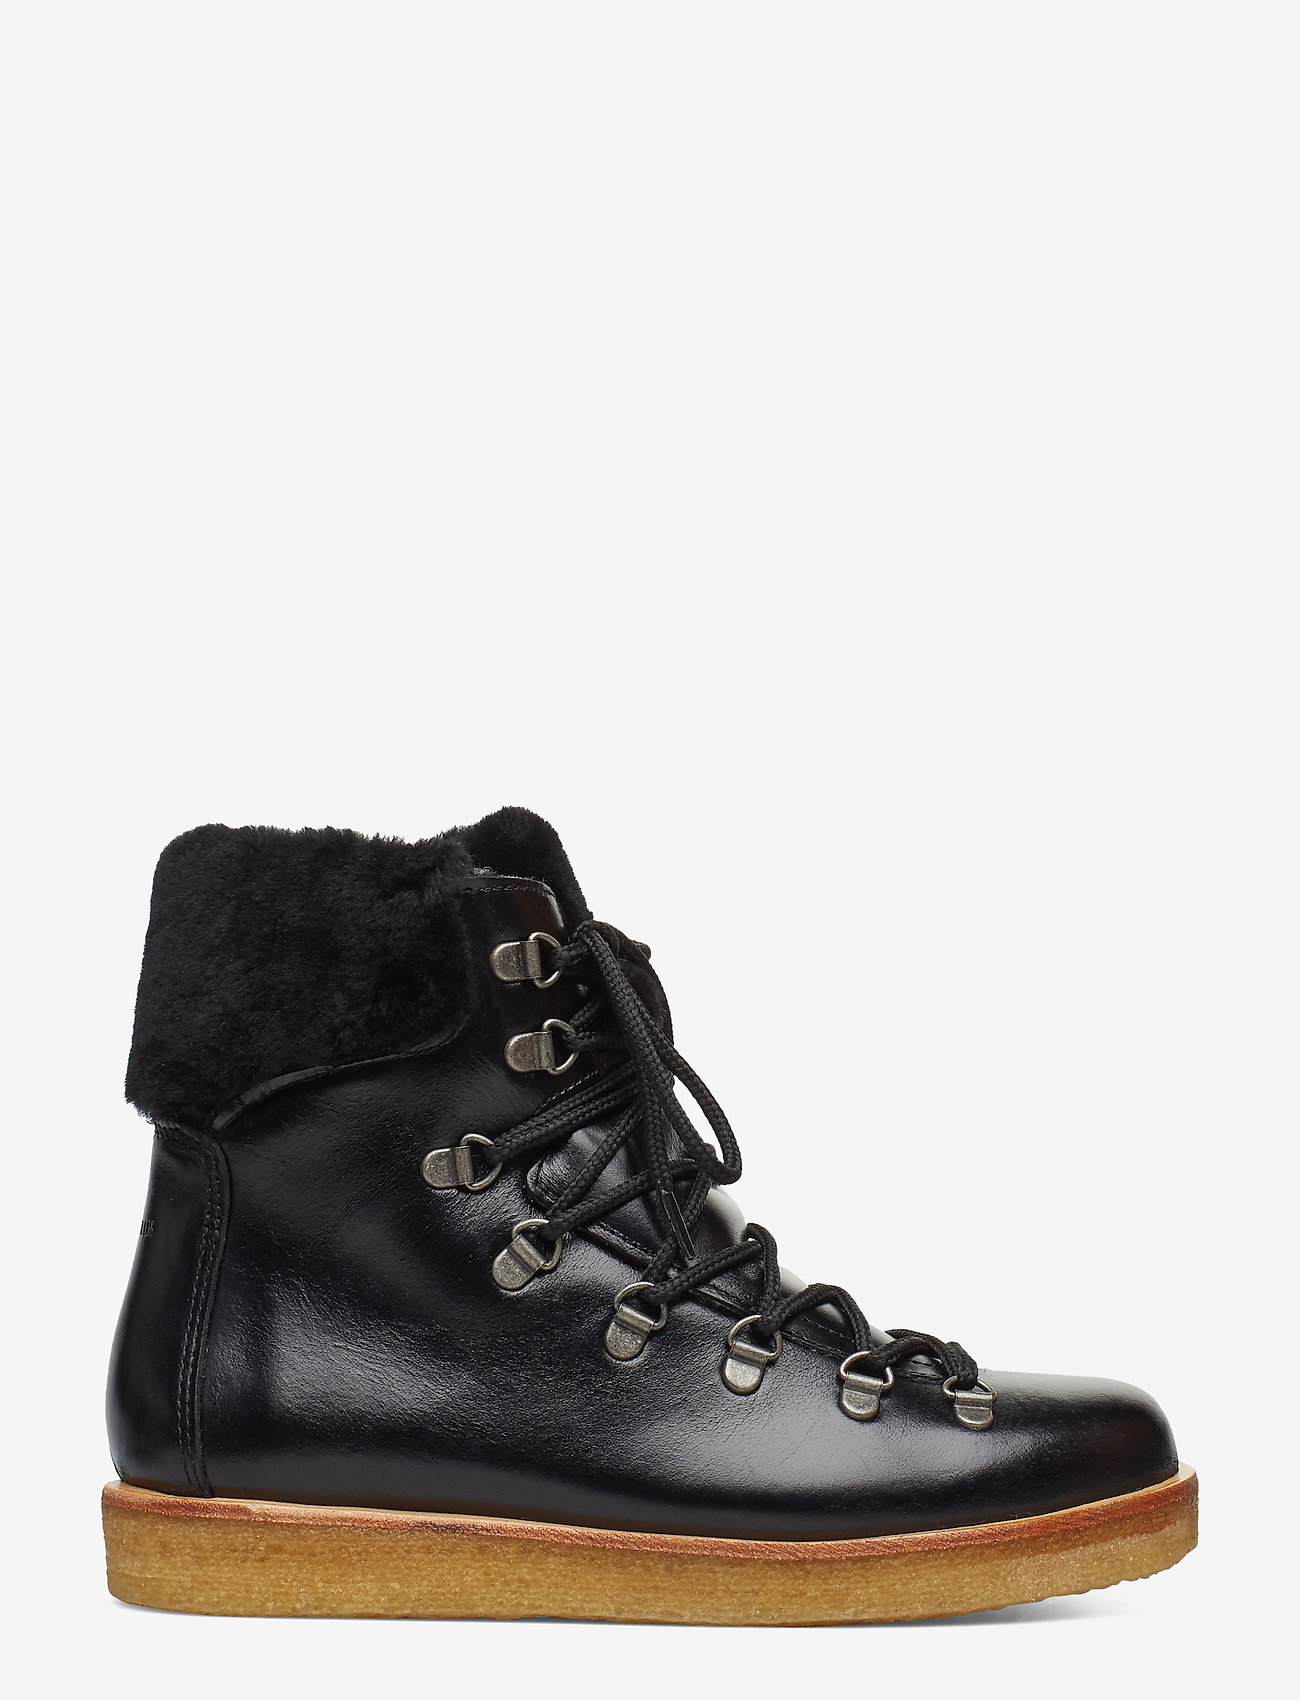 ANGULUS - Boots - flat - with laces - flade ankelstøvler - 1835/2014 black/black lambswoo - 1